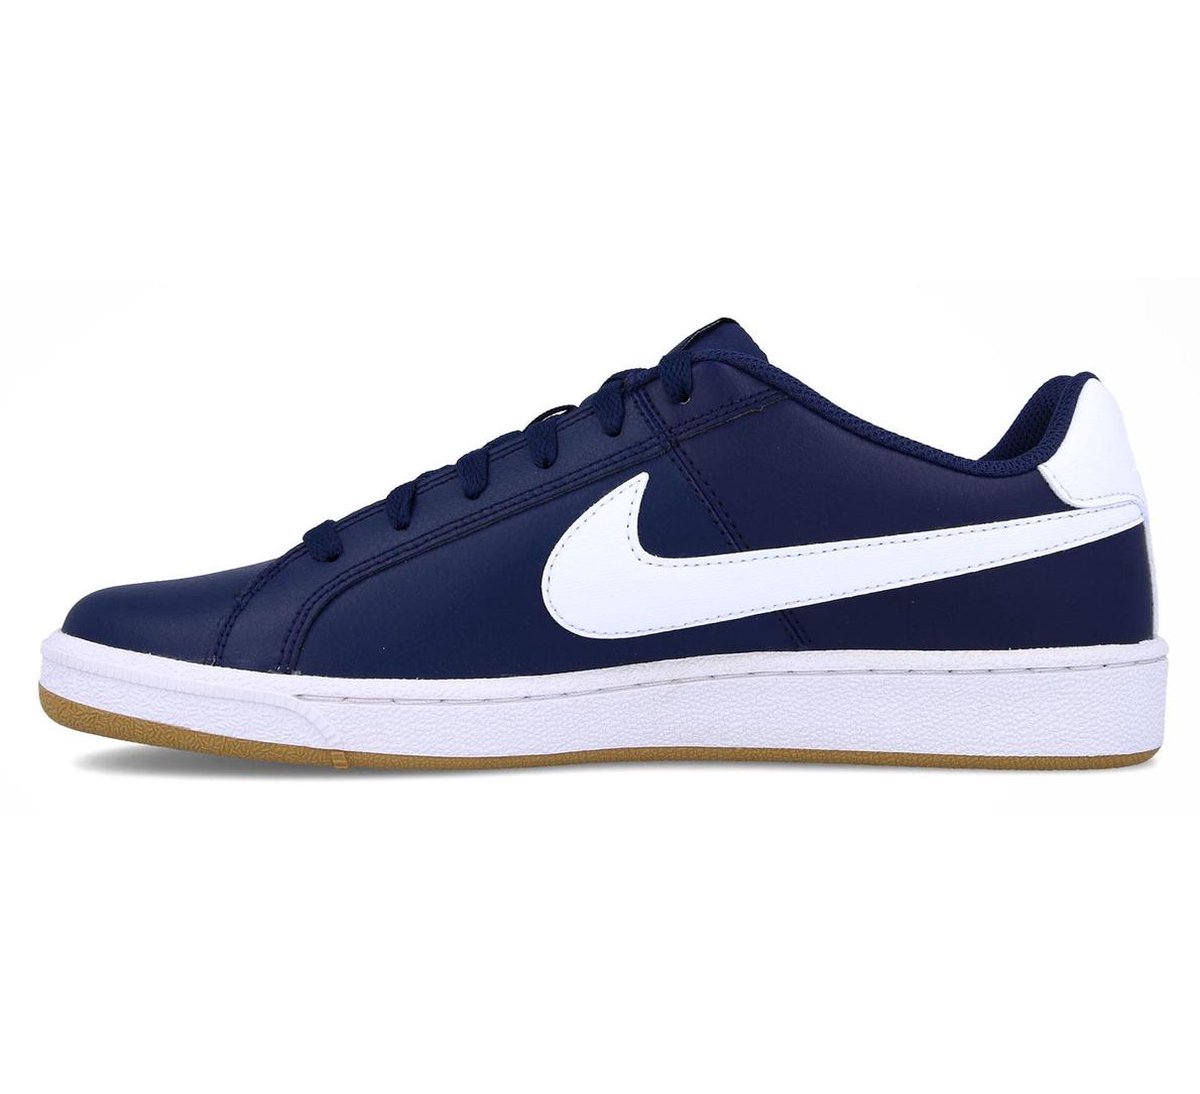 Nike Court Royale Sneakers - Maat 42.5 - Mannen - donker blauw/wit | bol.com